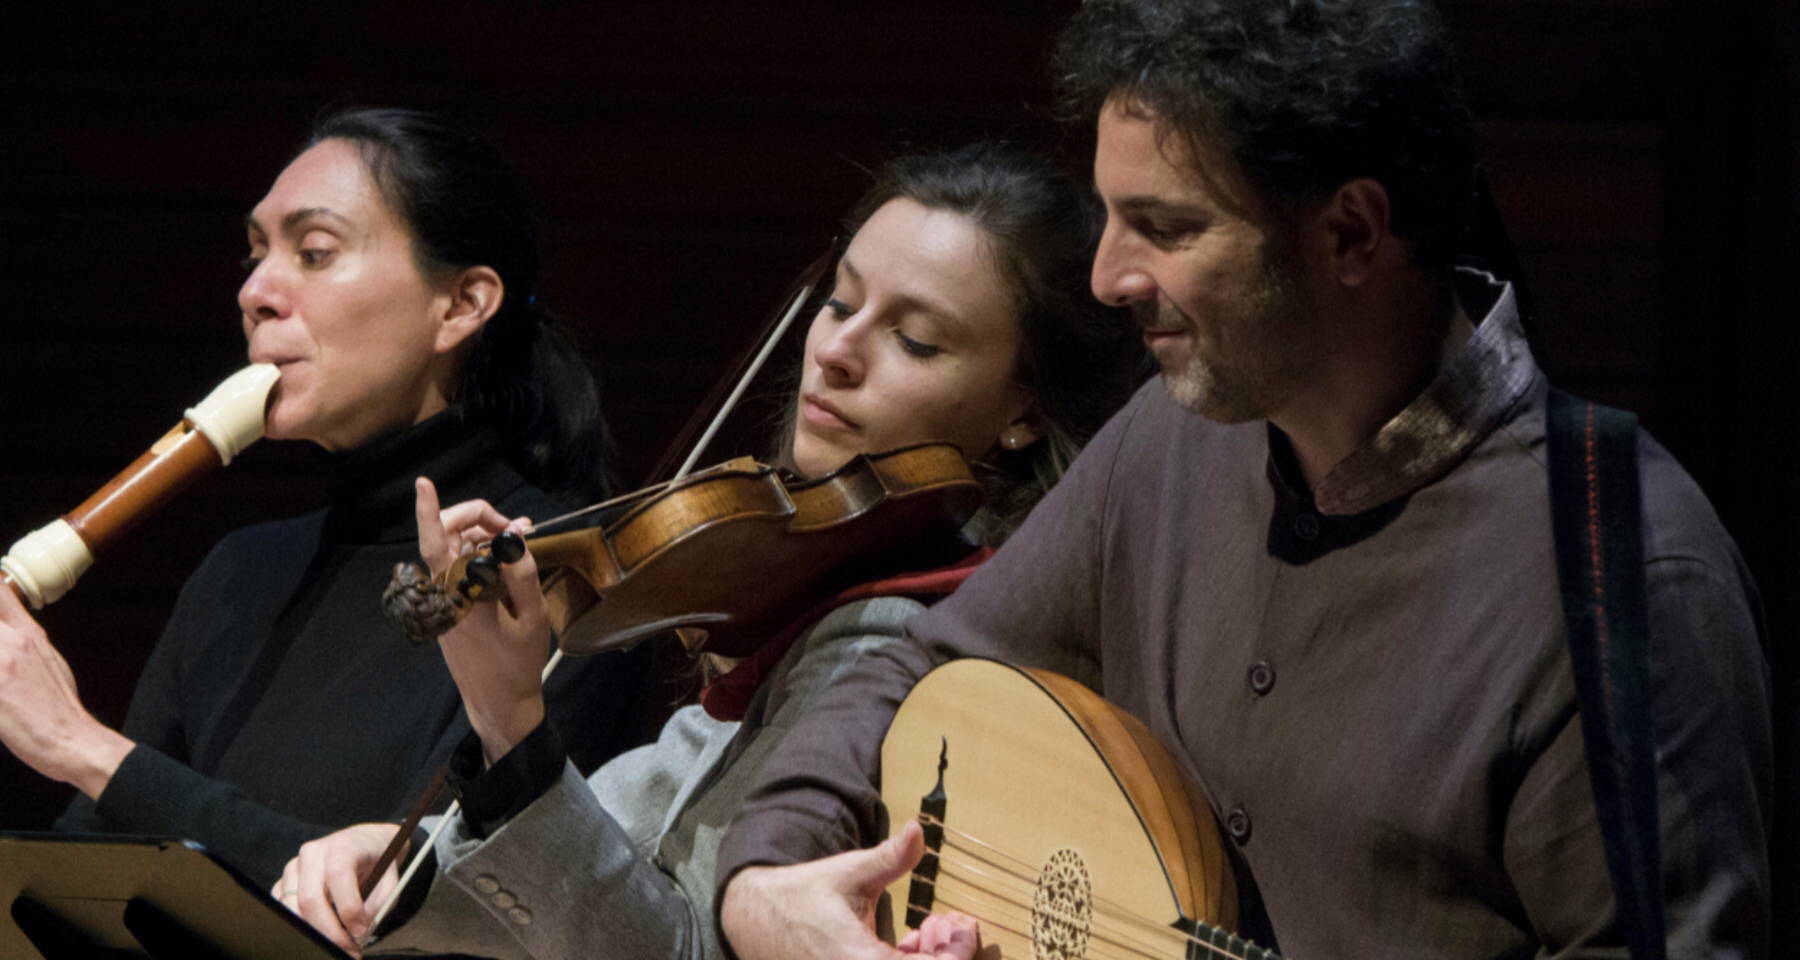 This Week from Guarneri Hall: Third Coast Baroque's: "Welcome Back Vivaldi!"